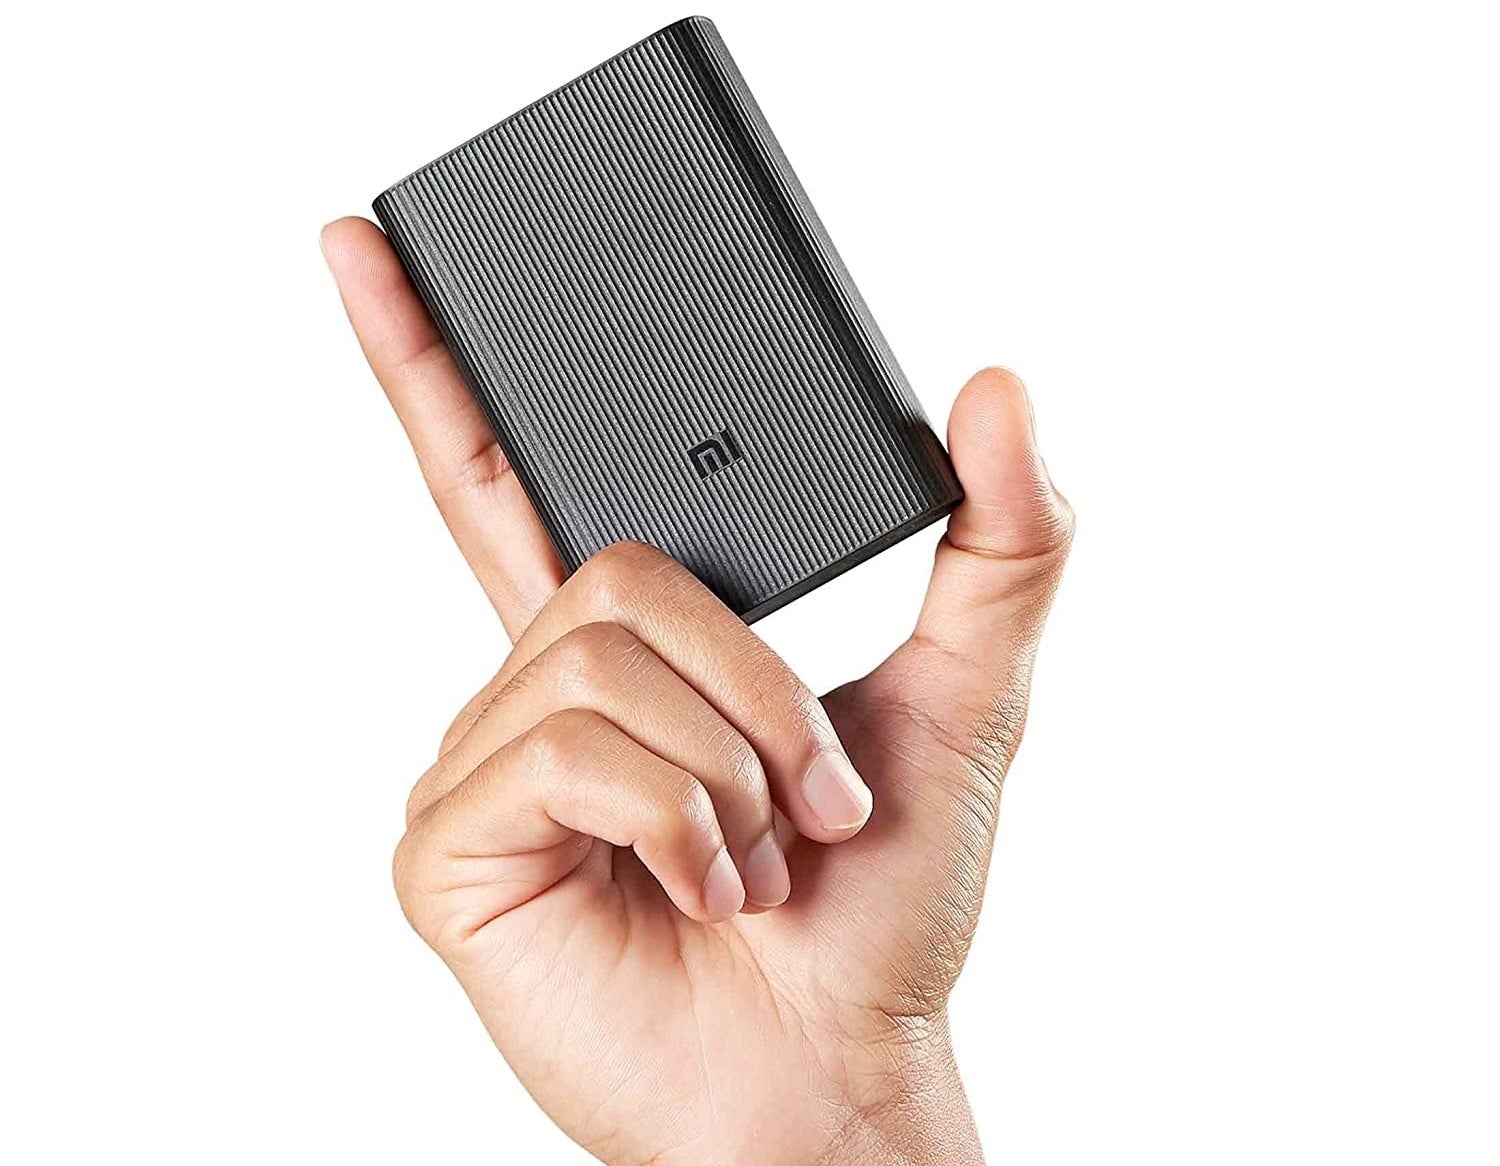 A person holding a power bank with two fingers